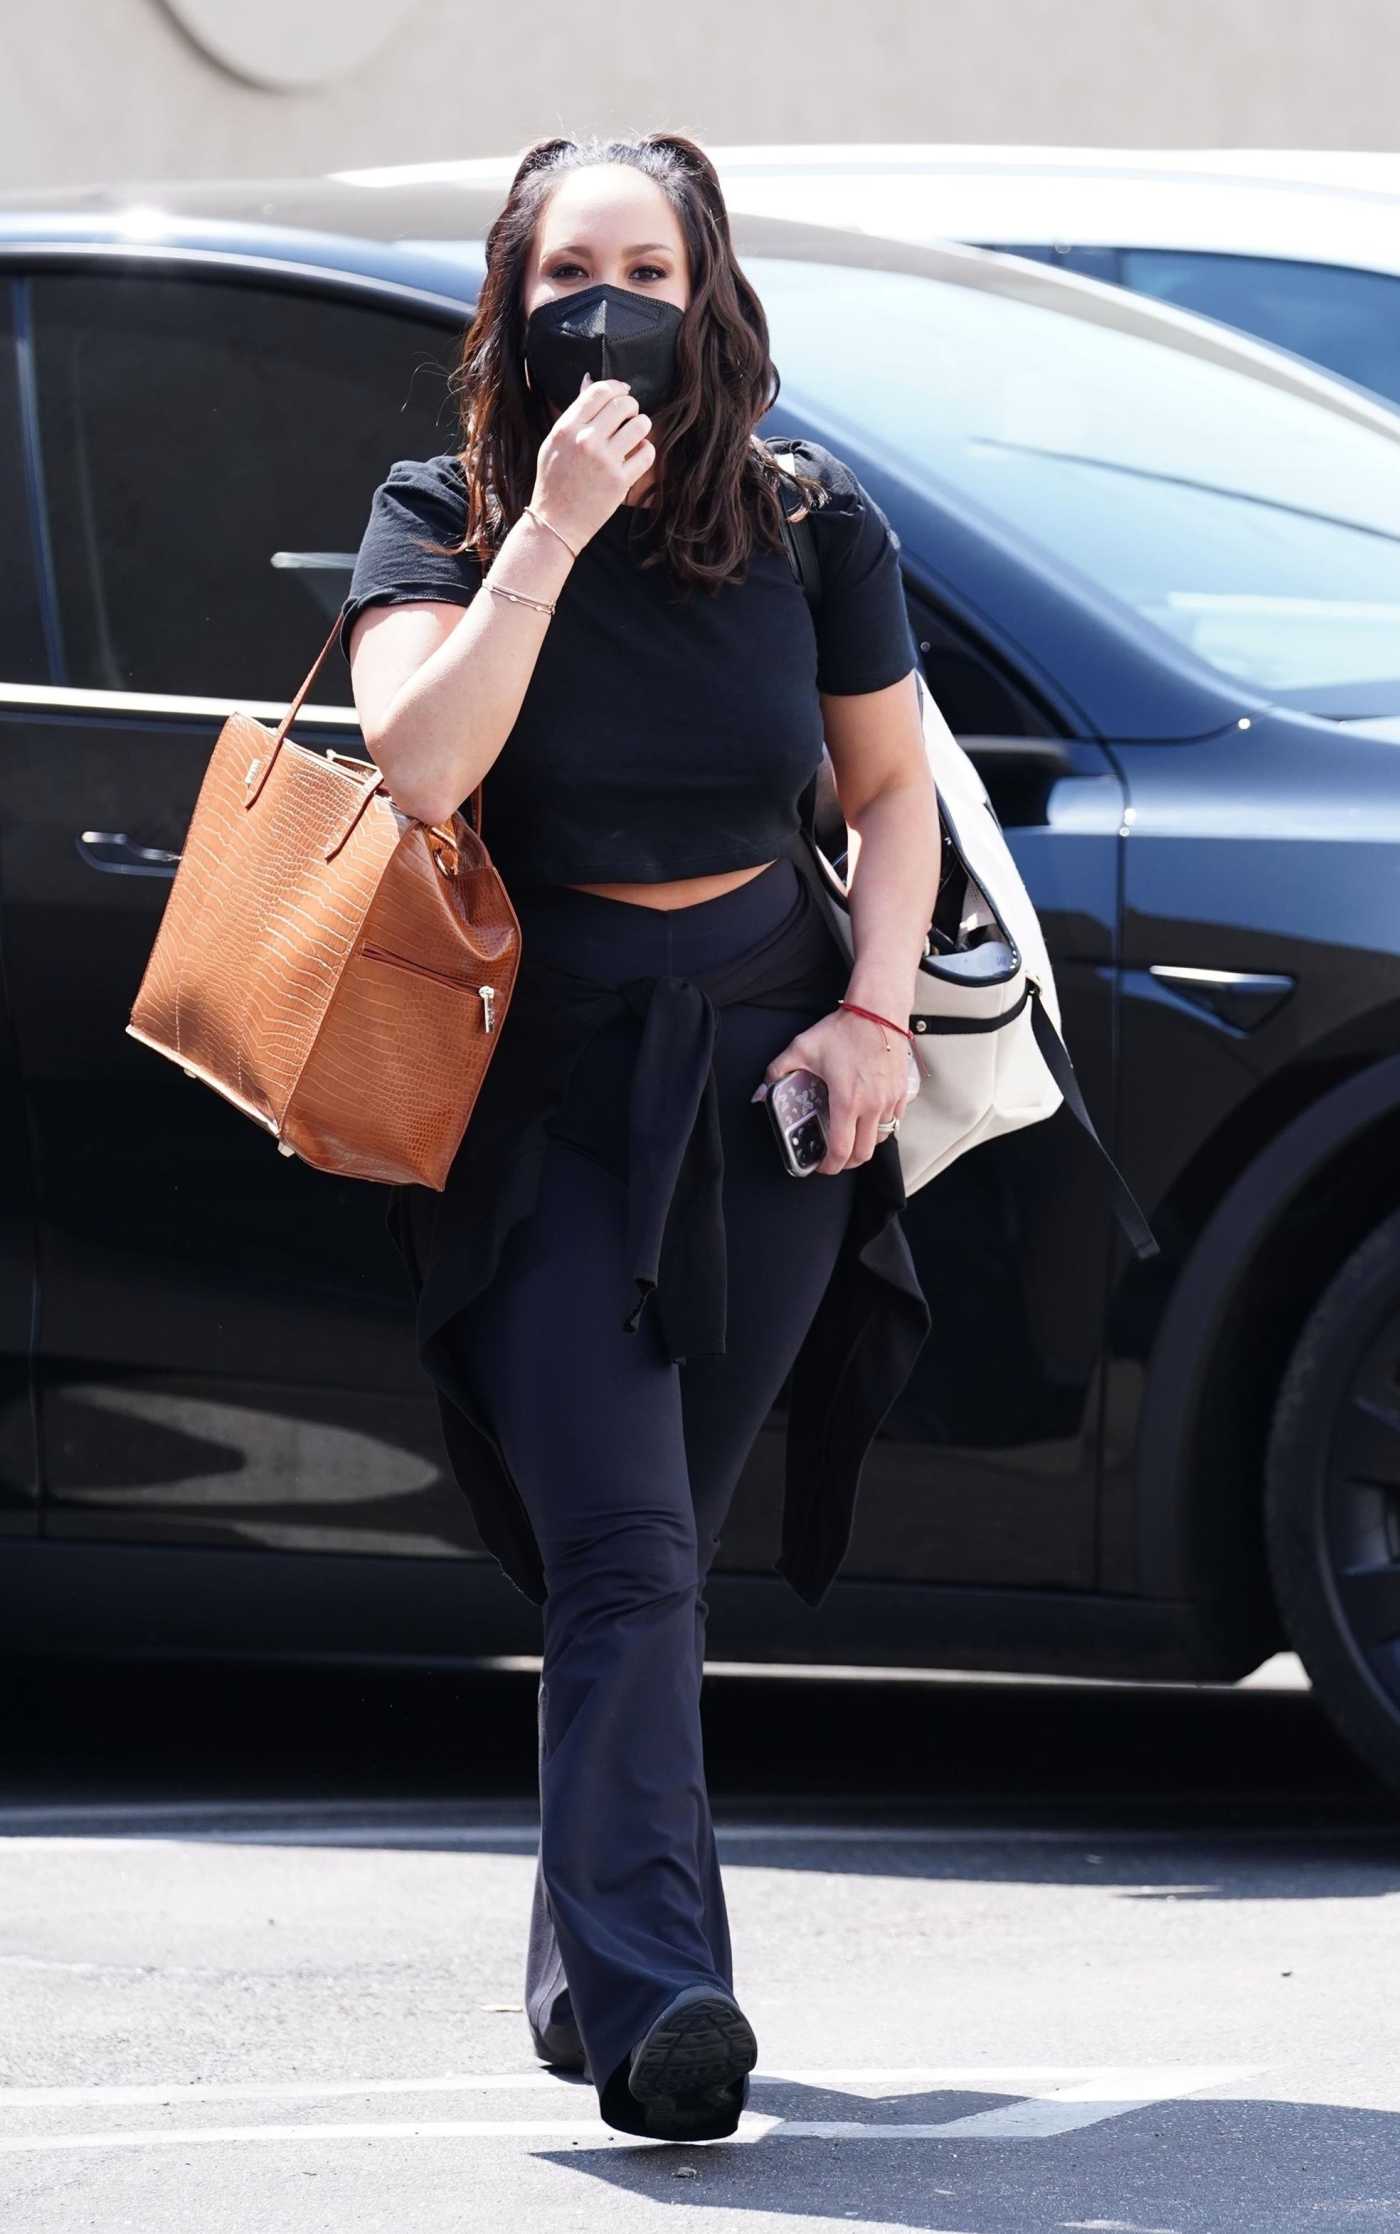 Cheryl Burke in a Black Outfit Arrives for Dance Practice at the DWTS Studio in Los Angeles 09/07/2021